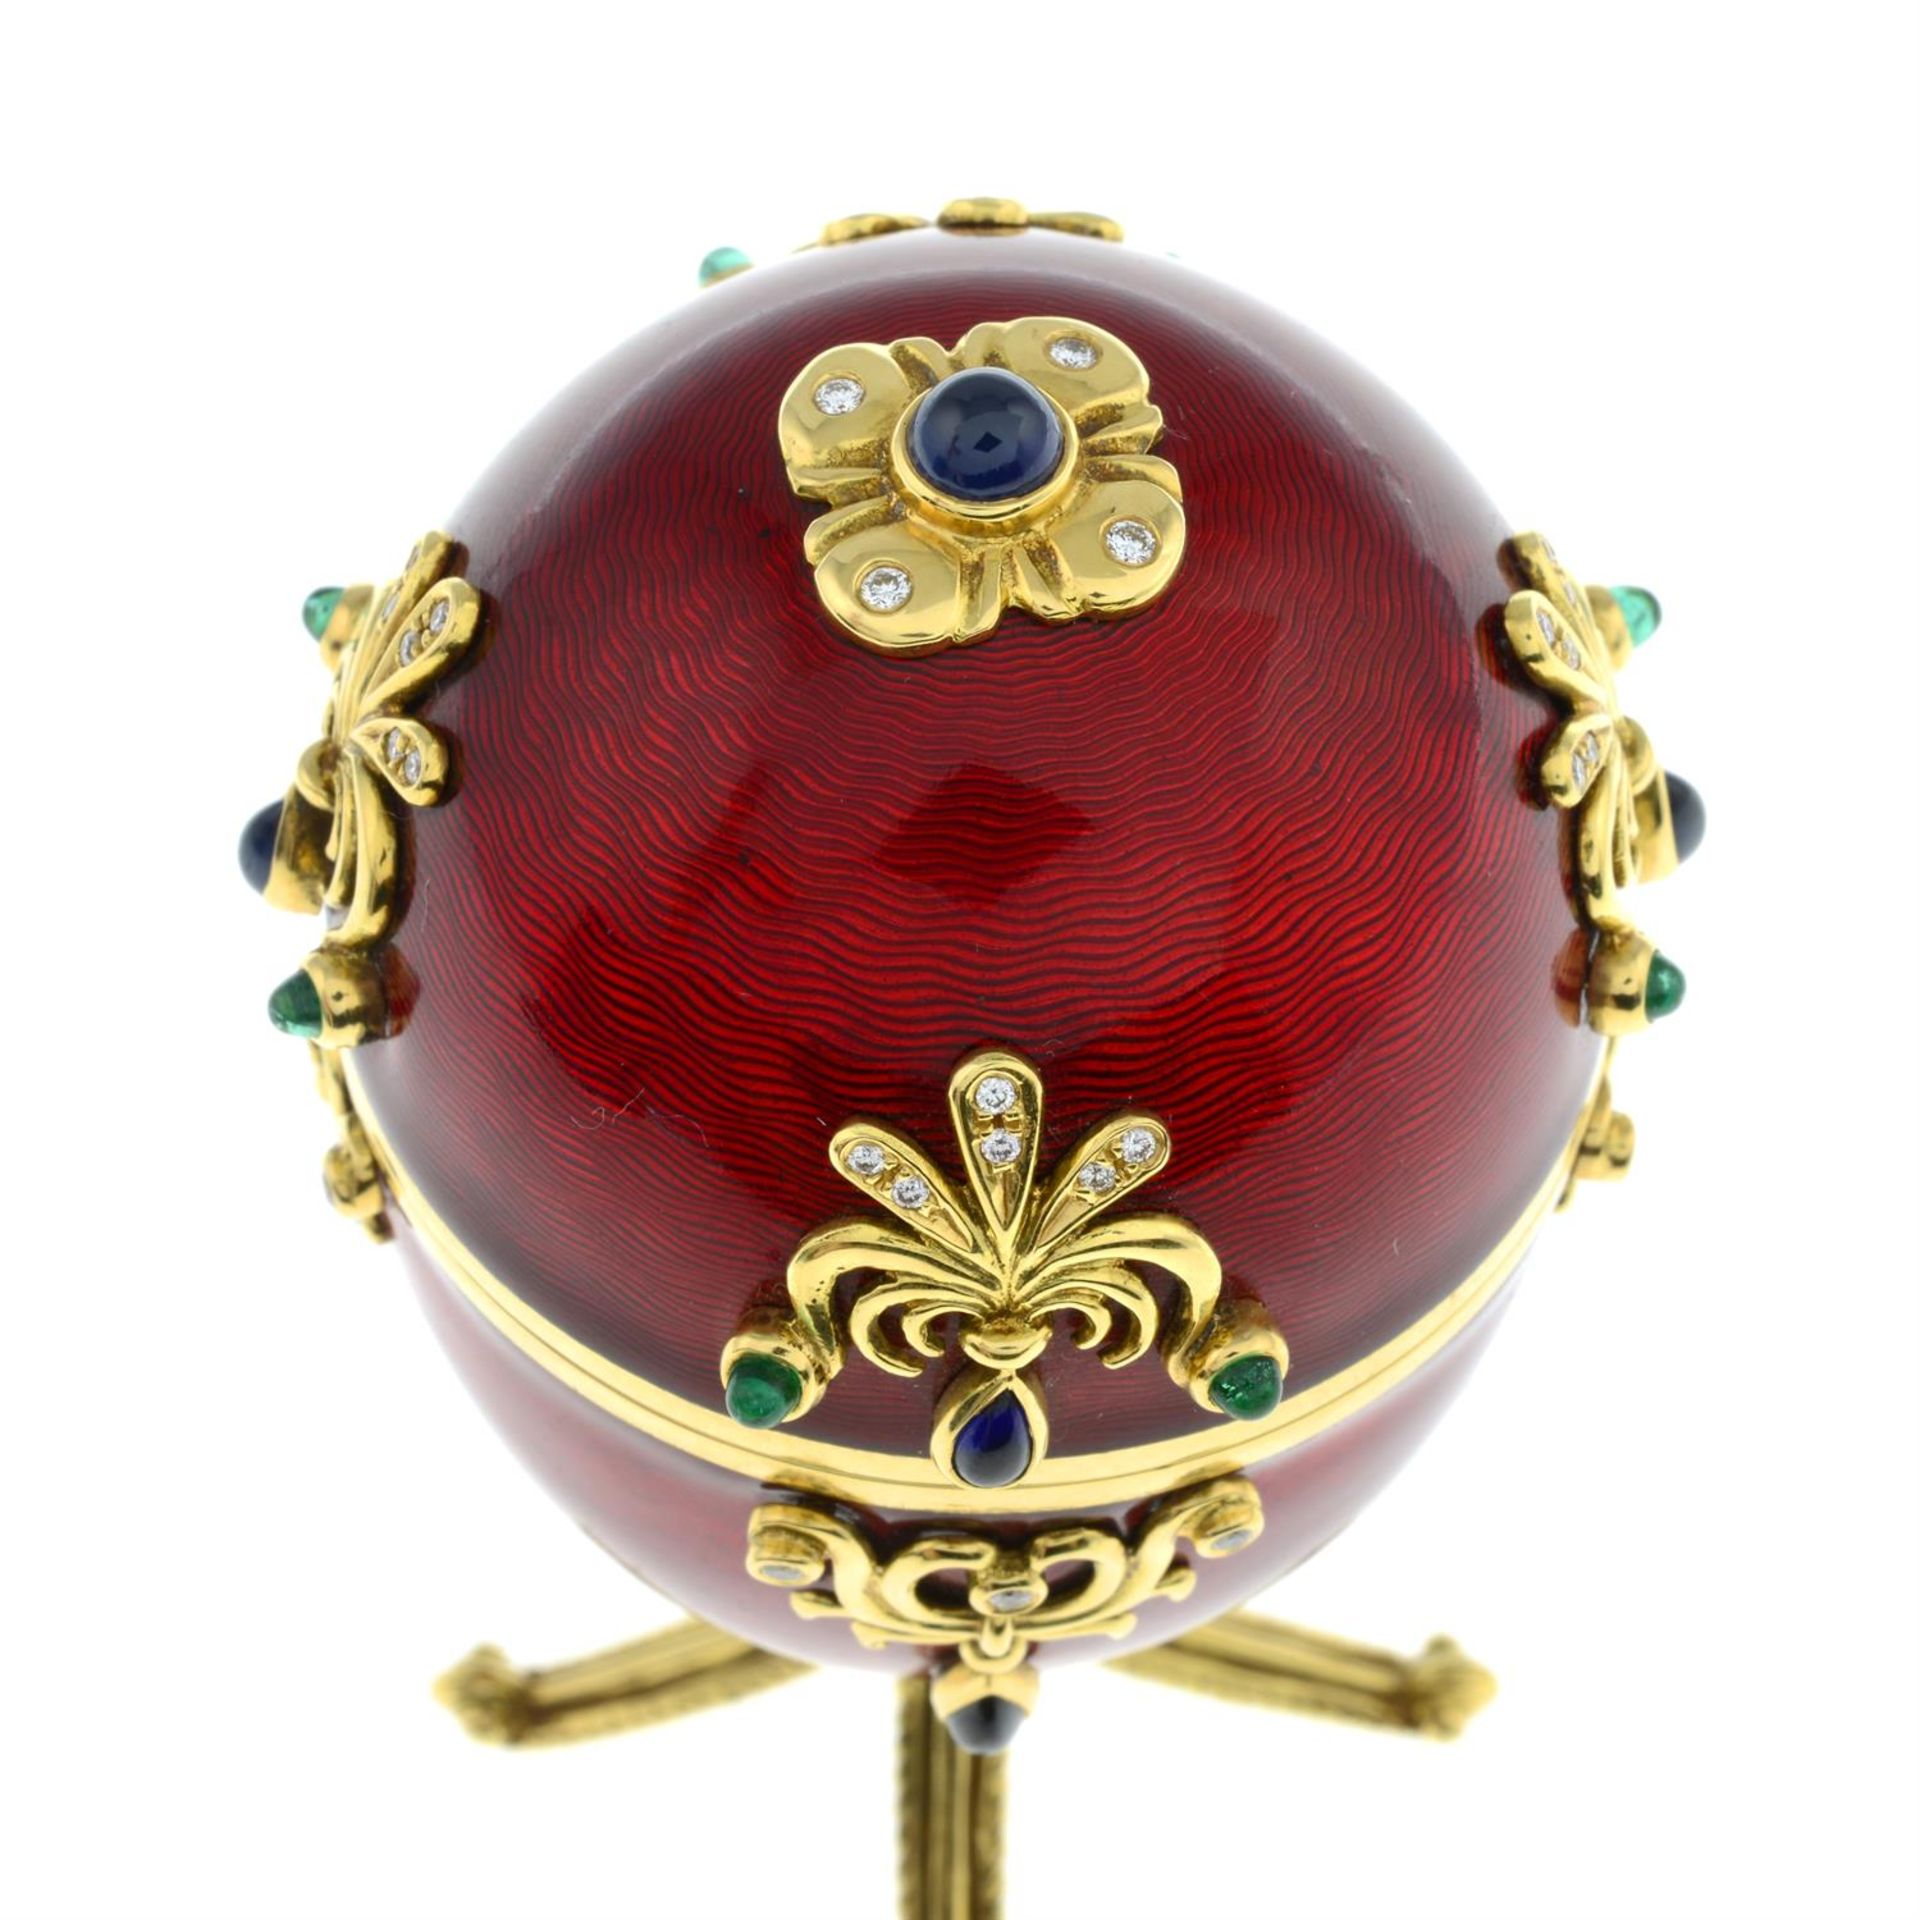 A limited edition red enamel and multi-gem egg sculpture, with hinged portrait interior, - Image 7 of 7